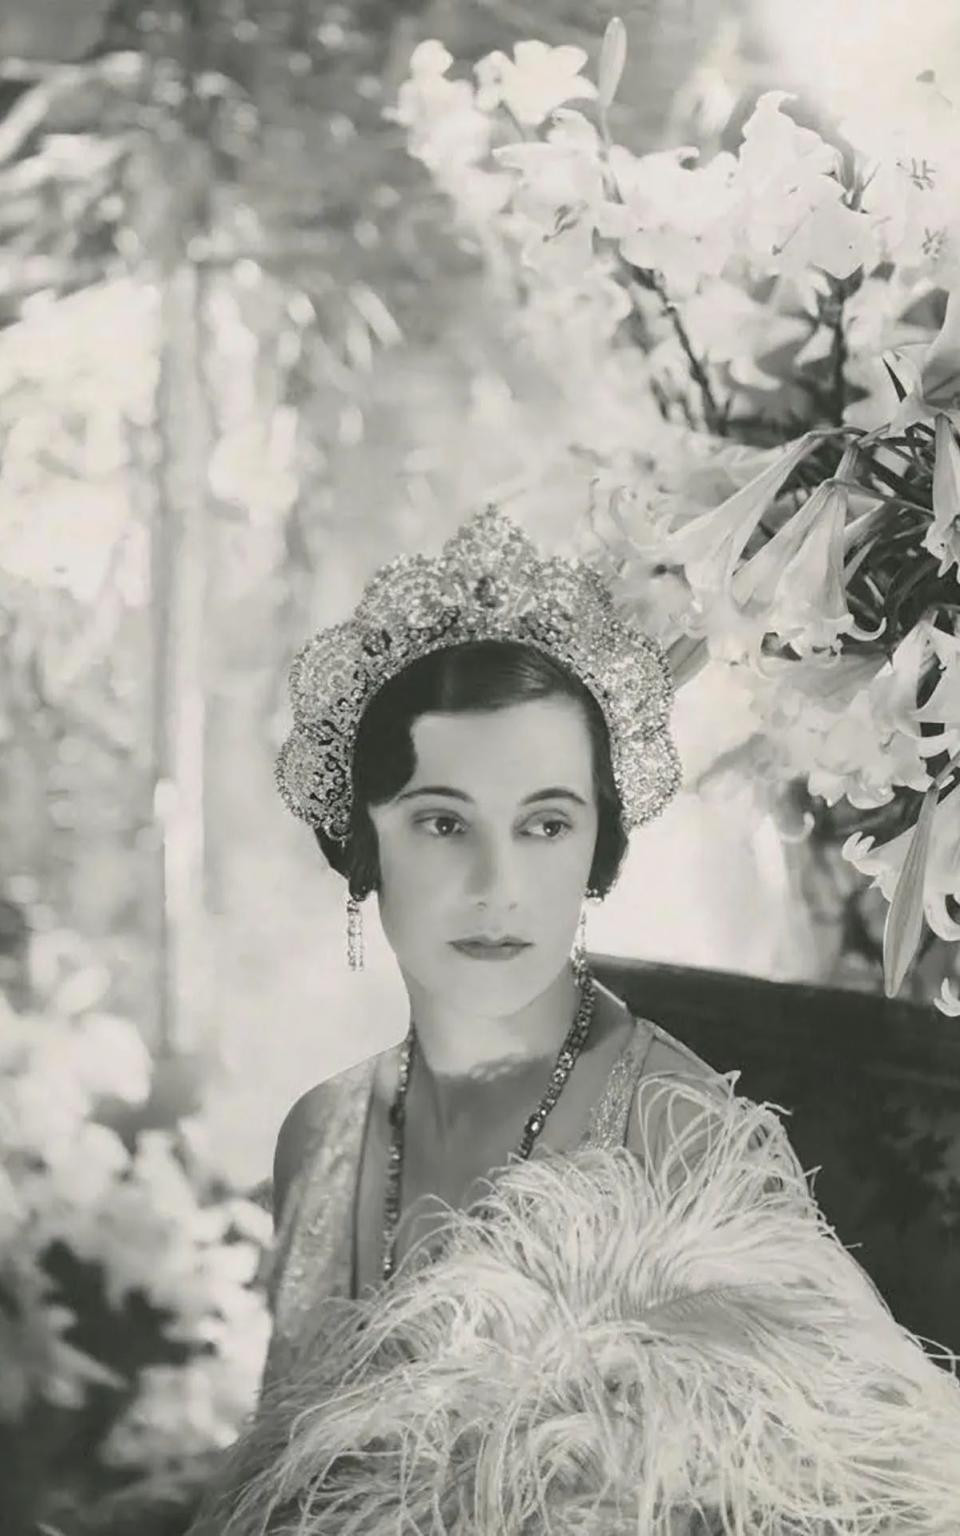 Vogue August 15, 1931: Portrait of the Duchess of Westminster (formerly Loelia Ponsonby)